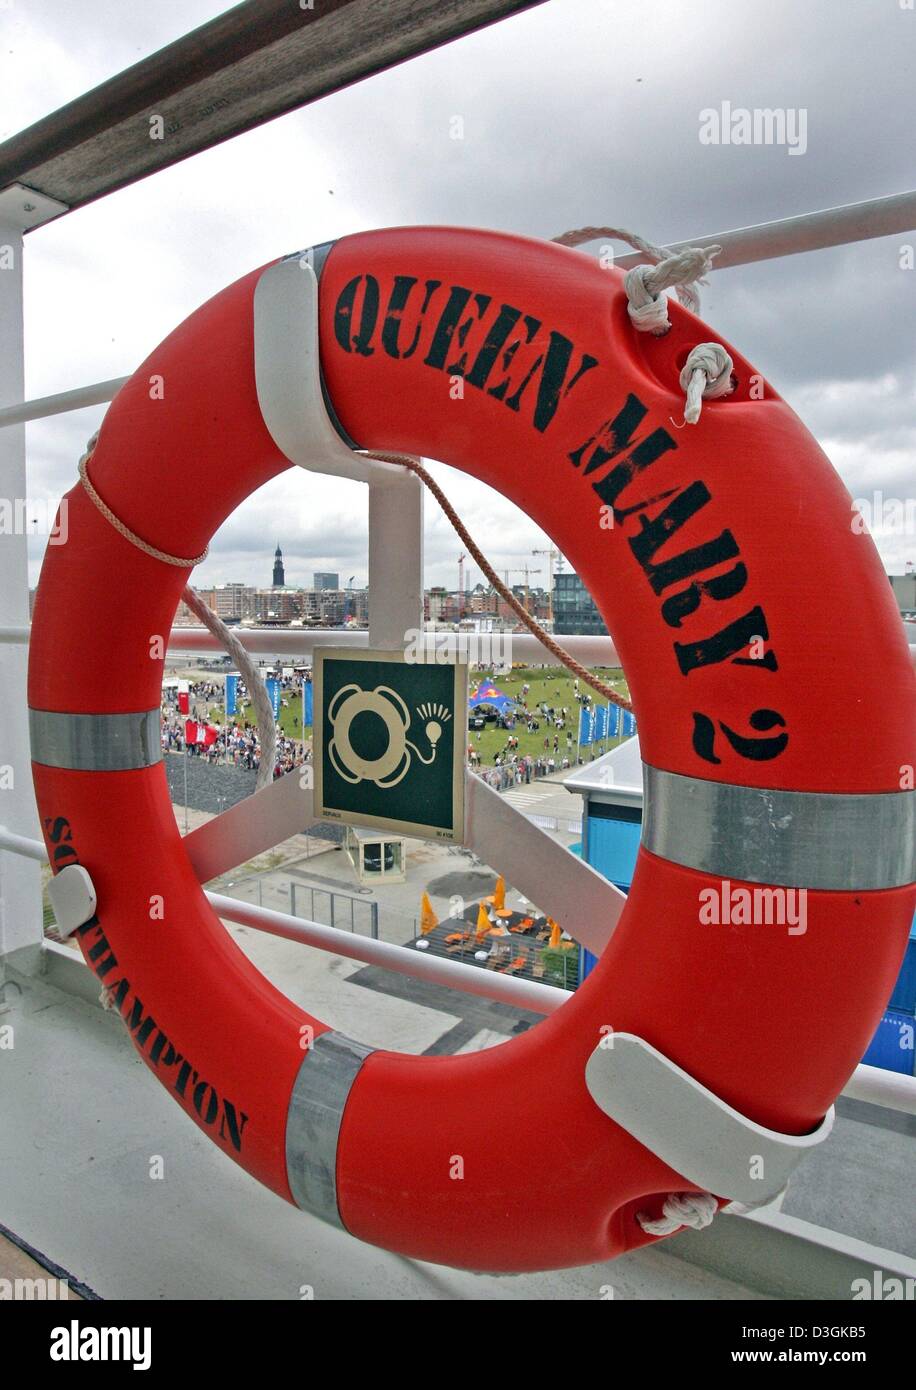 (dpa) - A lifebelt hangs on the railing of the luxury cruise liner 'Queen Mary 2' which is docking at the pier of the harbour in Hamburg, Germany, 19 July 2004. The 'Queen Mary 2', which was built at a cost of 800 million dollars, is the flagship of the British Cunard shipowning company. The vessel is 345 metres long, the length of the Eiffel Tower, and accommodates up to 2620 pass Stock Photo